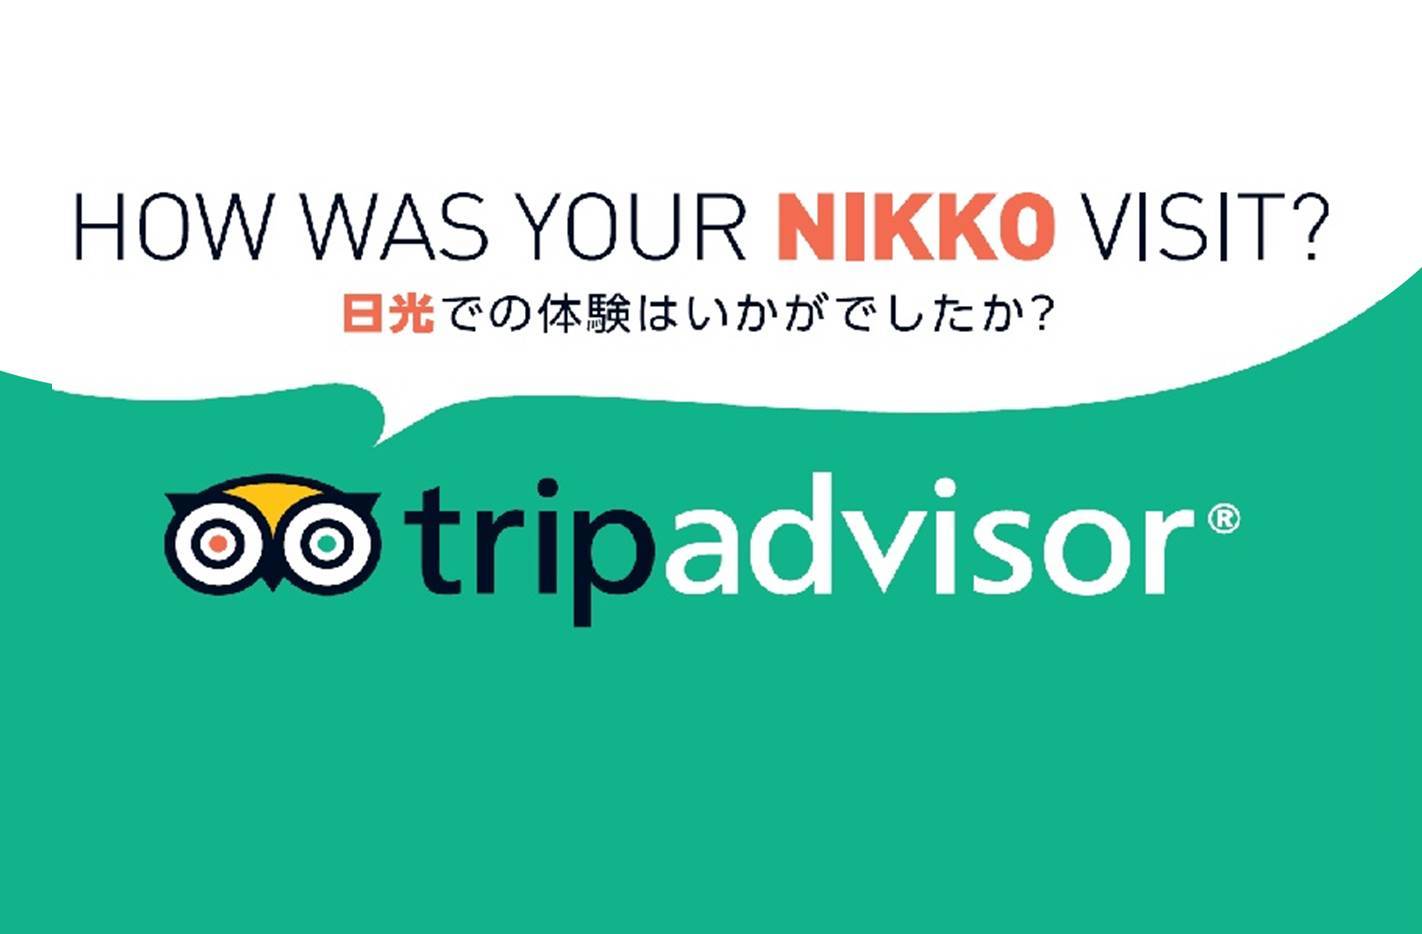 Write a review about your experience in Nikko through TripAdvisor!